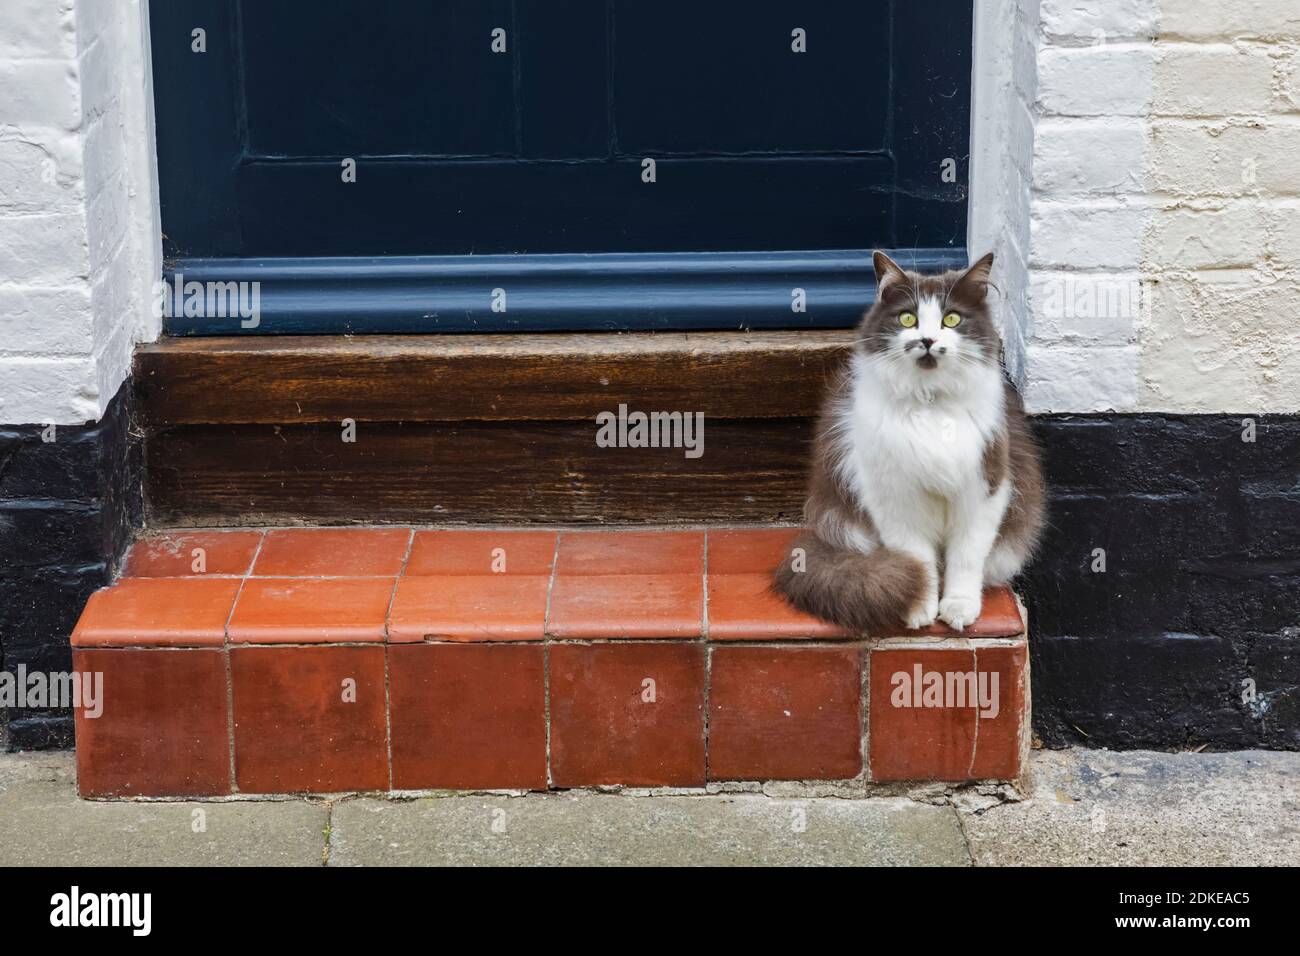 England, Kent, Deal, Cat Sitting on Doorstep and Looking at the Camera Stock Photo